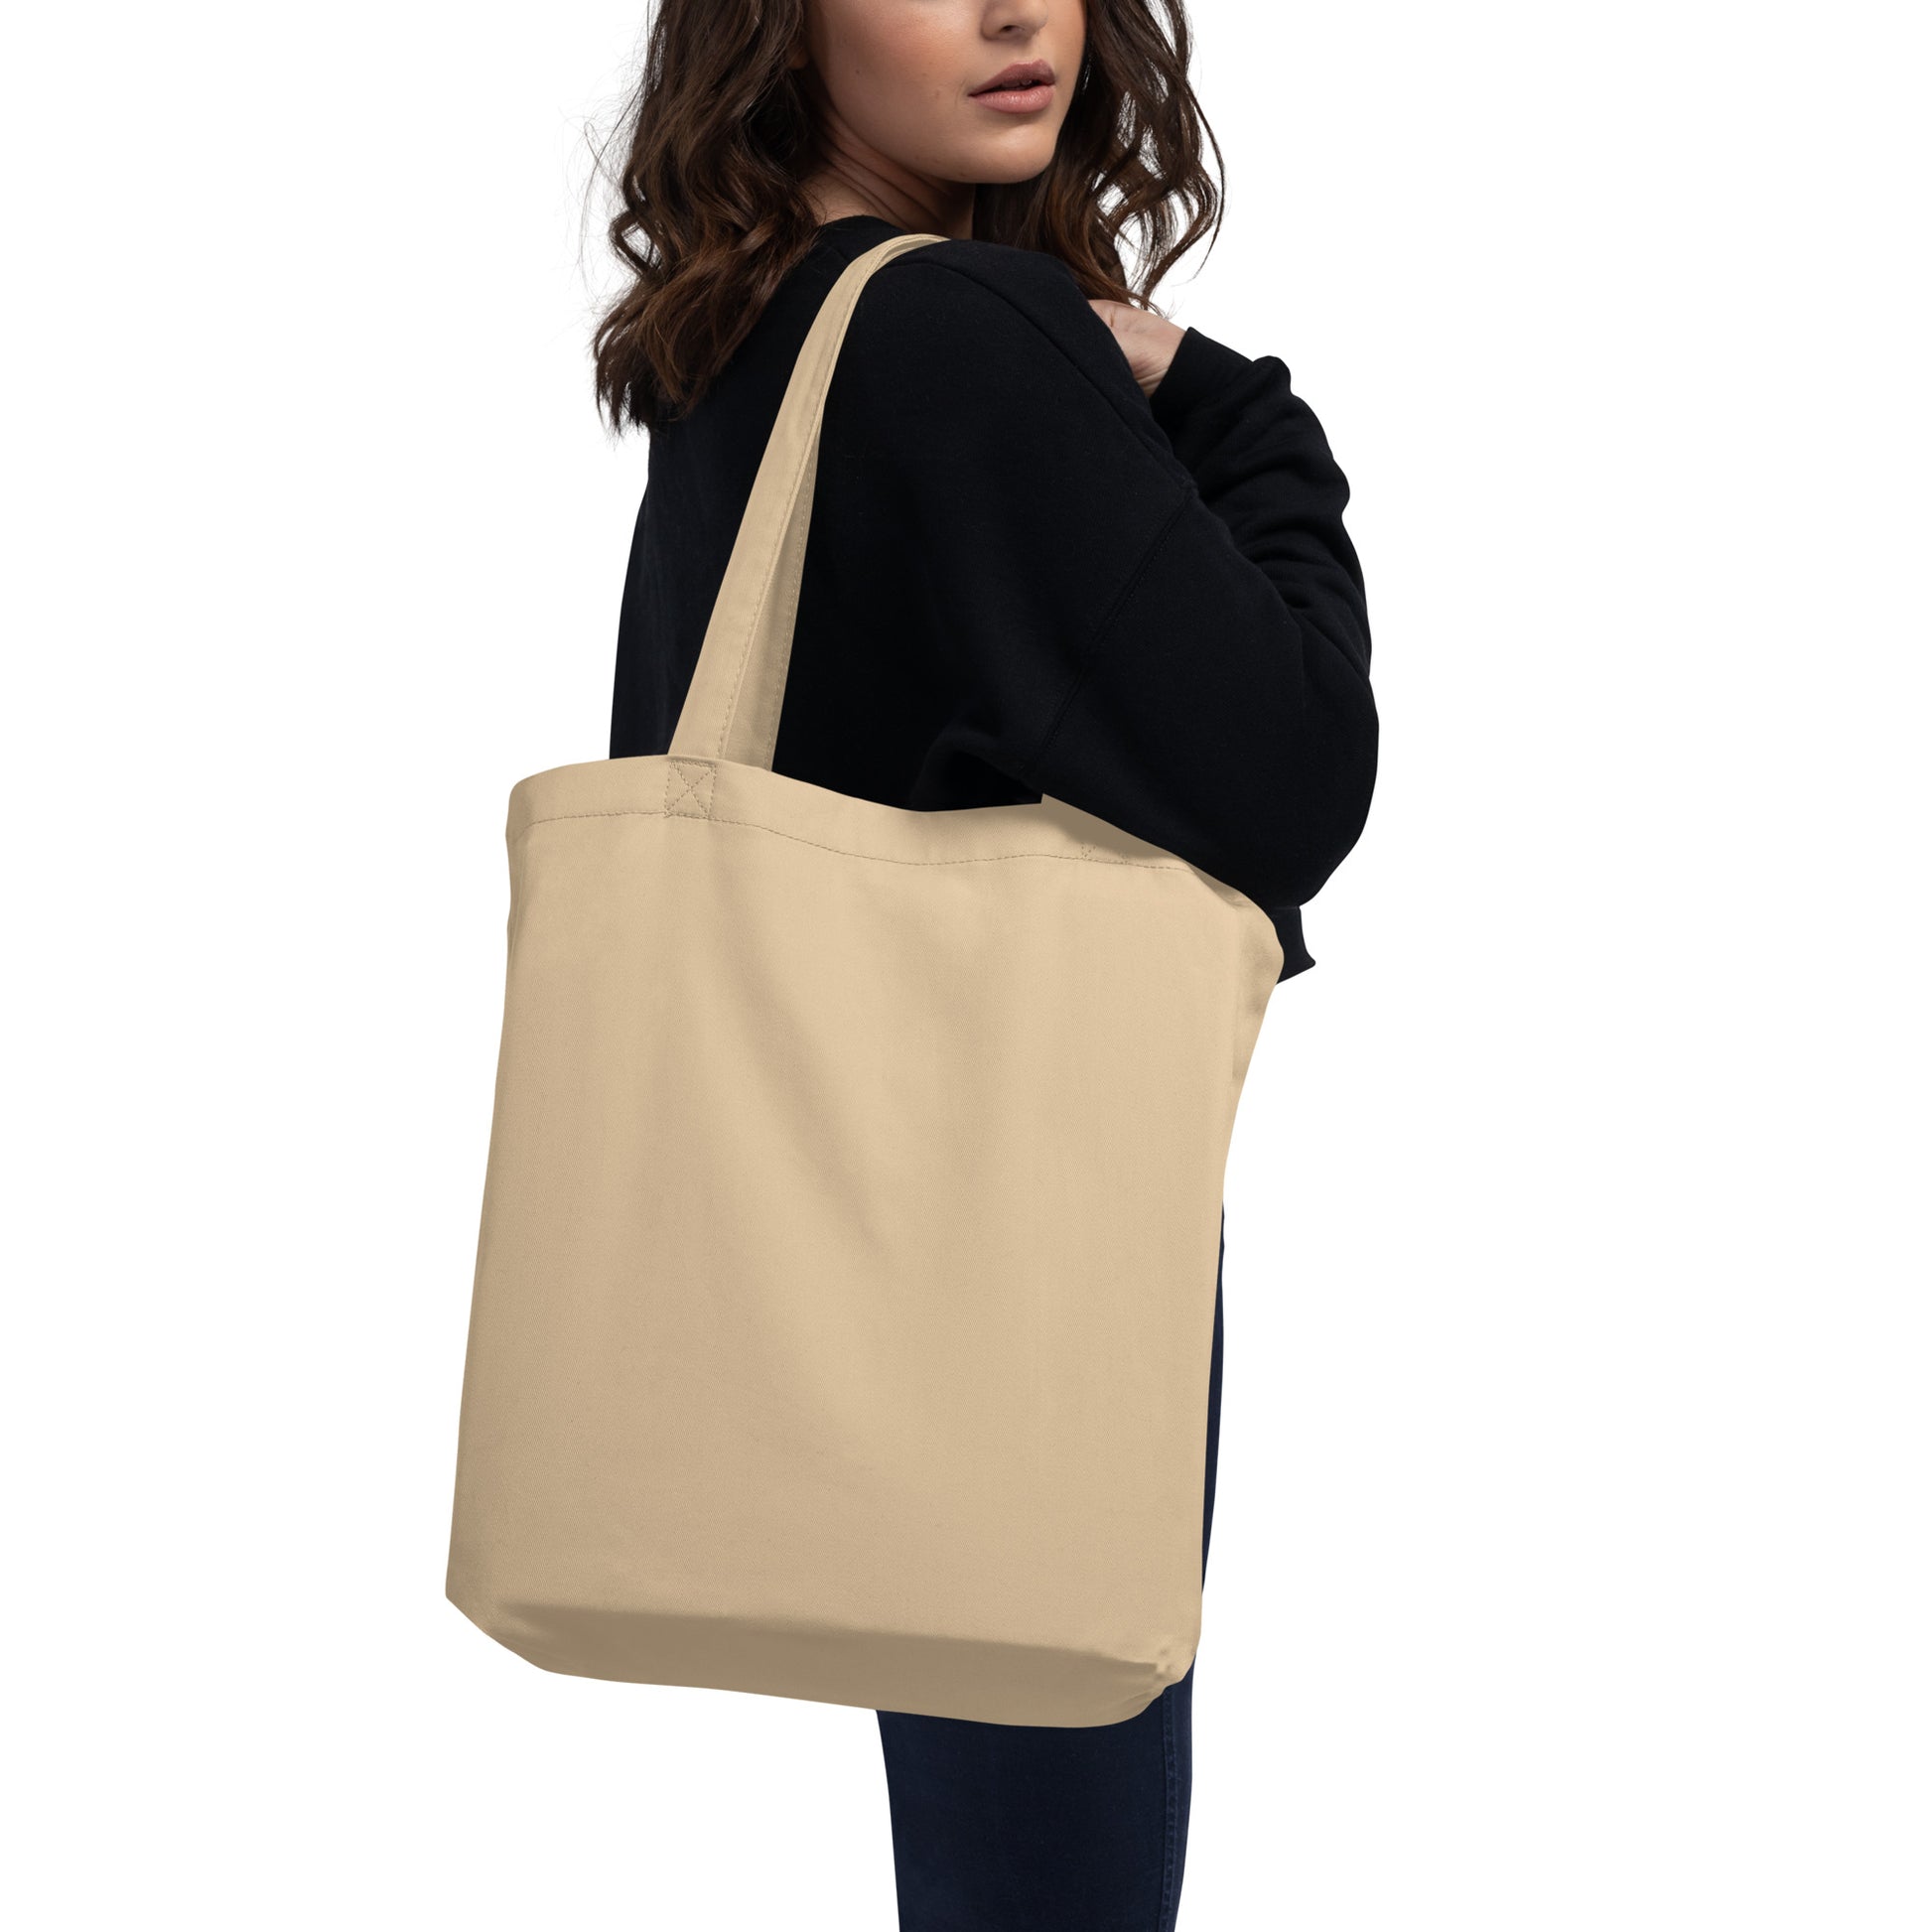 Aviation Gift Organic Tote - Black • ORD Chicago • YHM Designs - Image 06